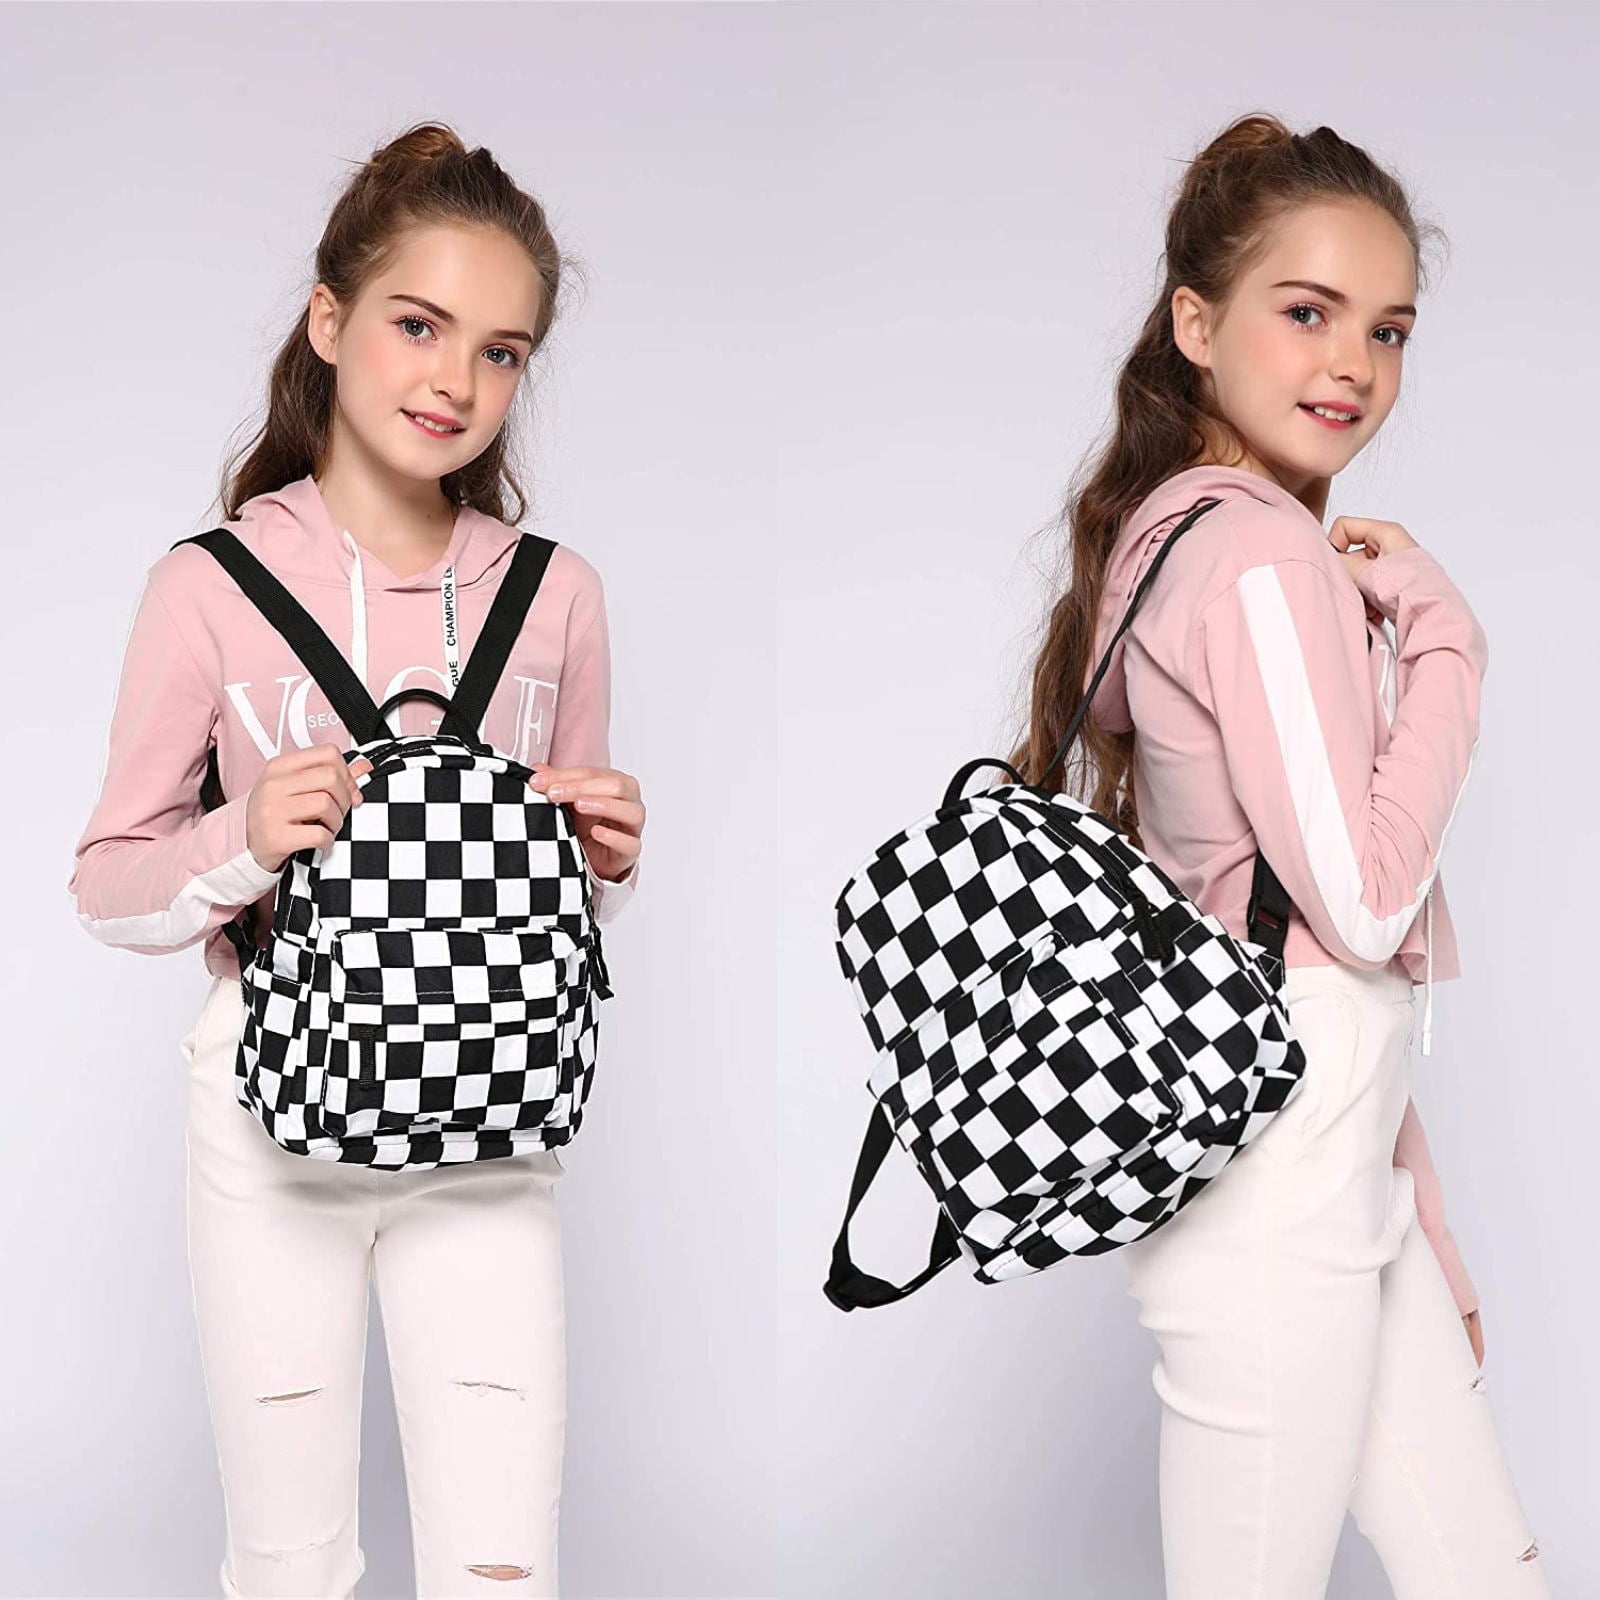  kiobrvhe Checkered Backpack Black and White Waterproof Bags  Travel Bags Laptop Casual Daypacks Work for Women (A black and white) :  Electronics